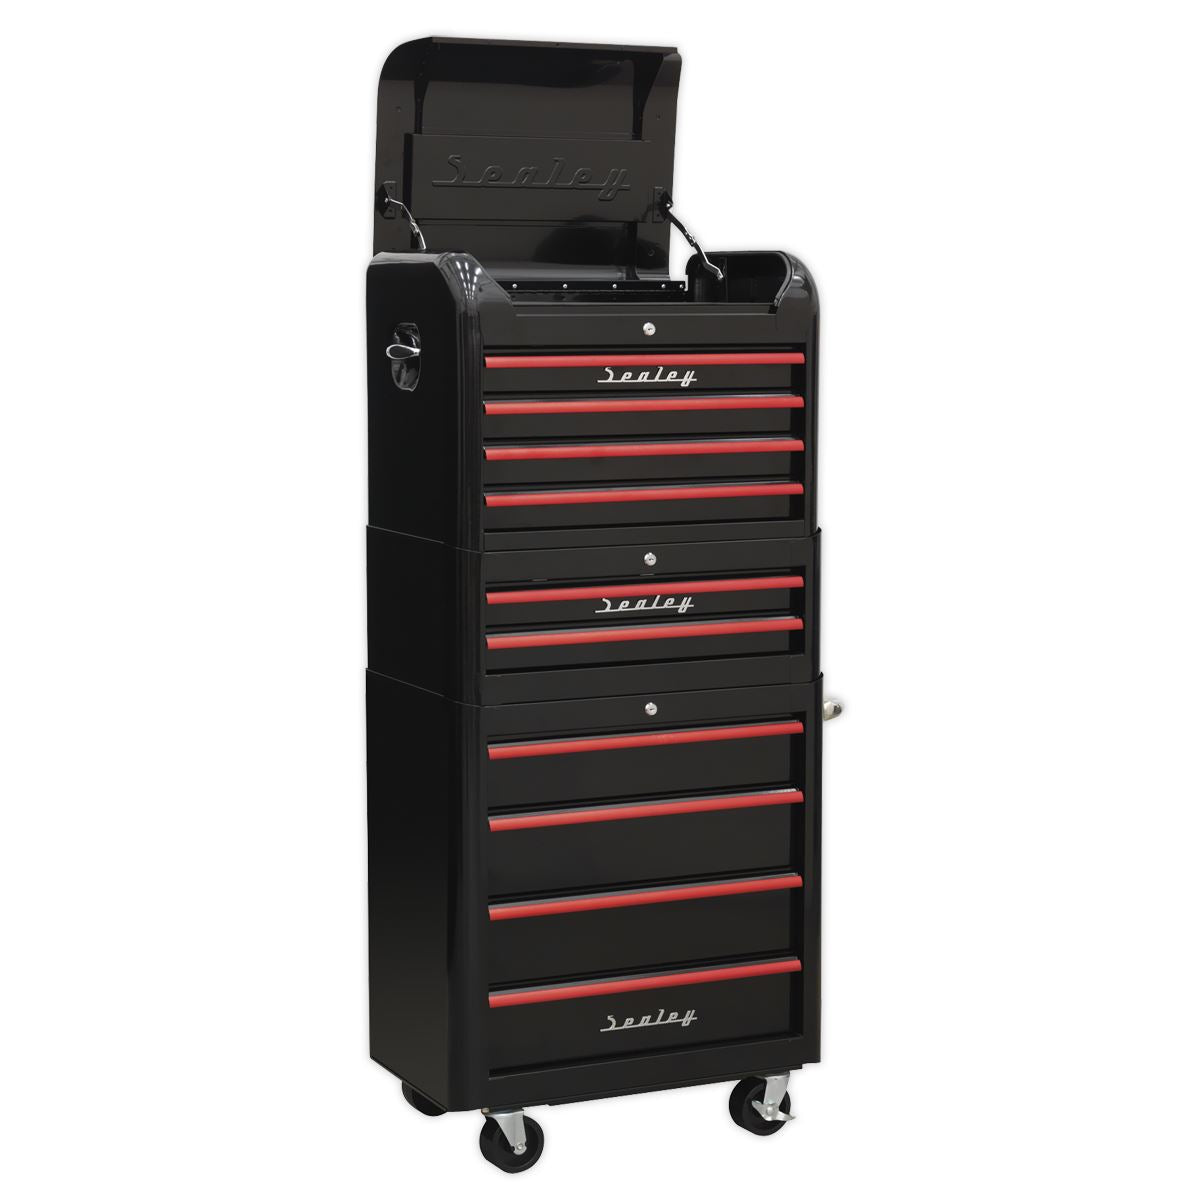 Sealey Premier Retro Style Topchest, Mid-Box Tool Chest & Rollcab Combination 10 Drawer - Black with Red Anodised Drawer Pulls